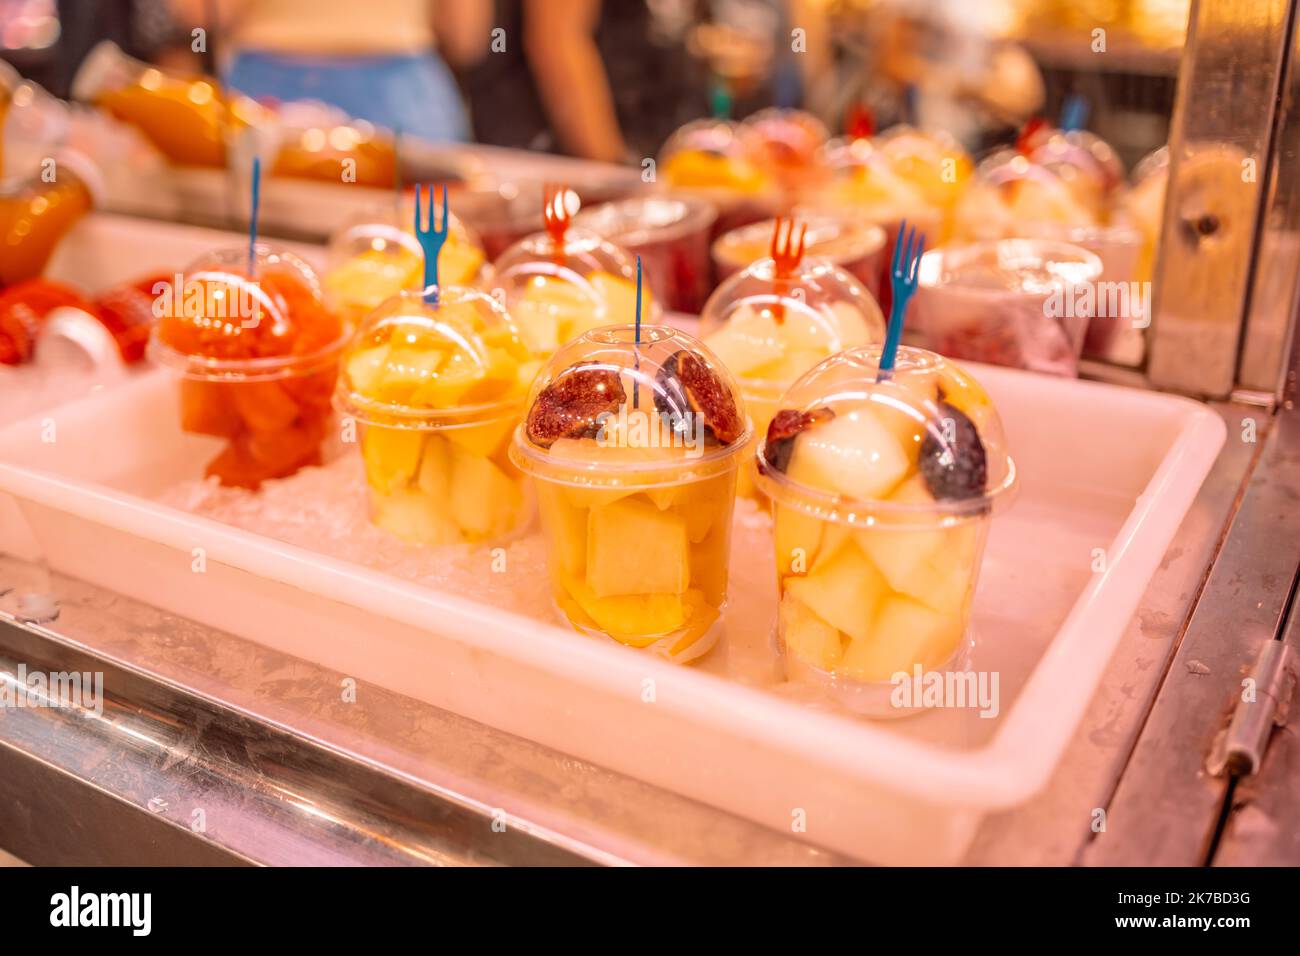 https://c8.alamy.com/comp/2K7BD3G/fresh-fruit-slicing-in-a-cup-exhibition-of-a-plastic-box-with-fresh-cut-pieces-of-fruit-in-the-store-2K7BD3G.jpg